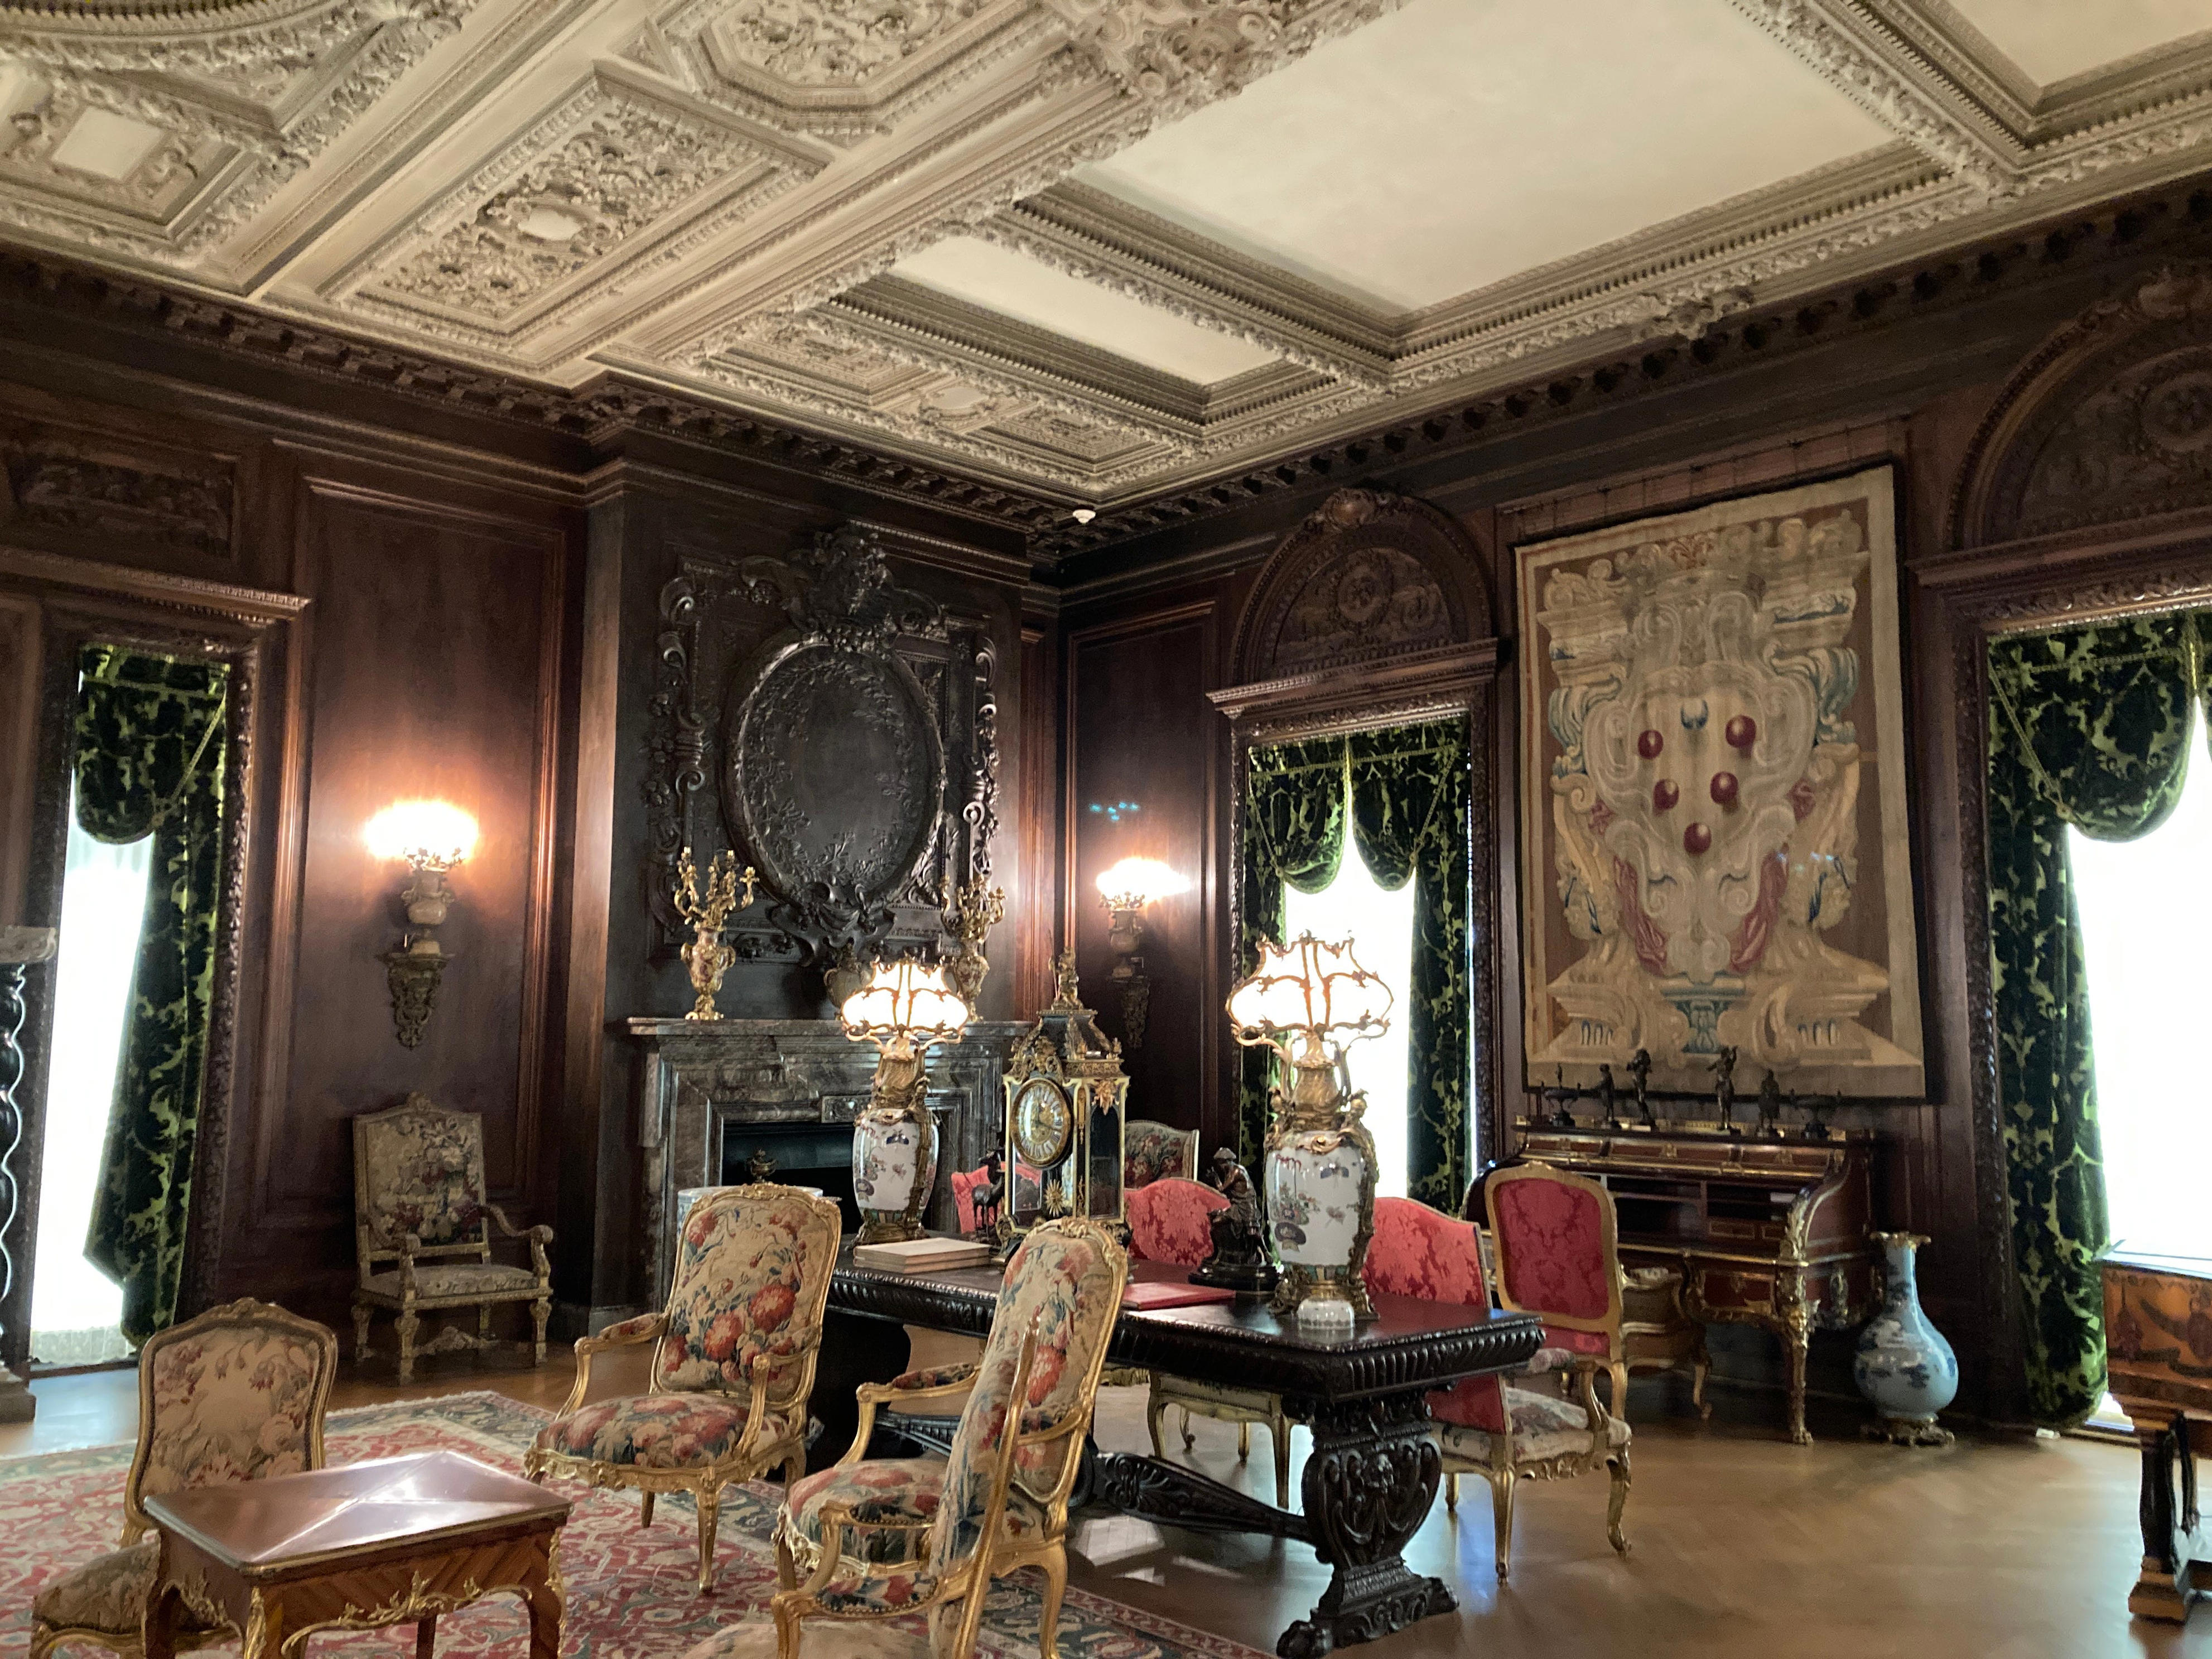 <p>Decorated with antique Renaissance furniture, the living room featured Circassian walnut panels on the walls.</p>